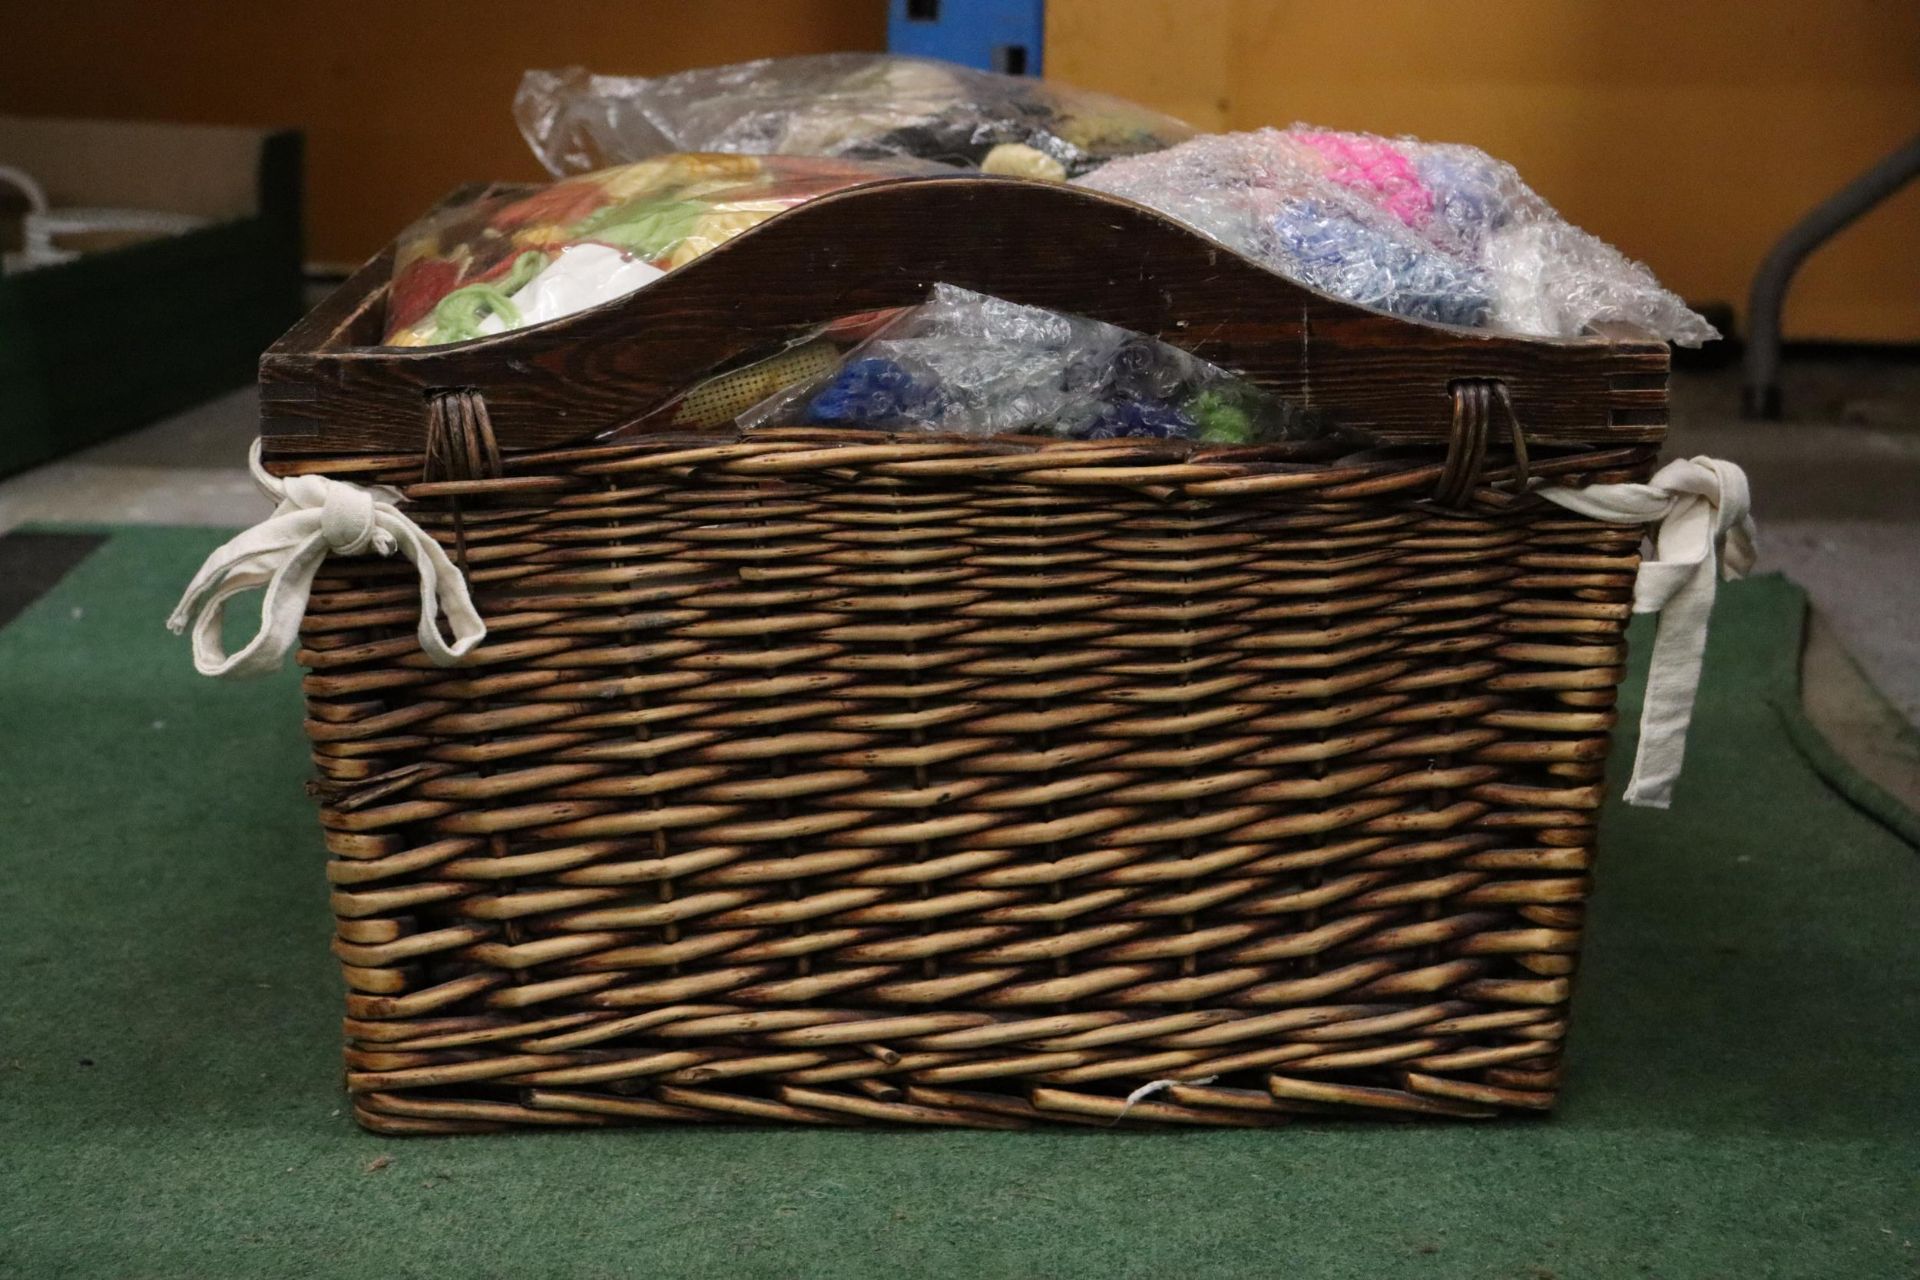 A LARGE BASKET OF TAPESTRY WOOL - Image 3 of 10